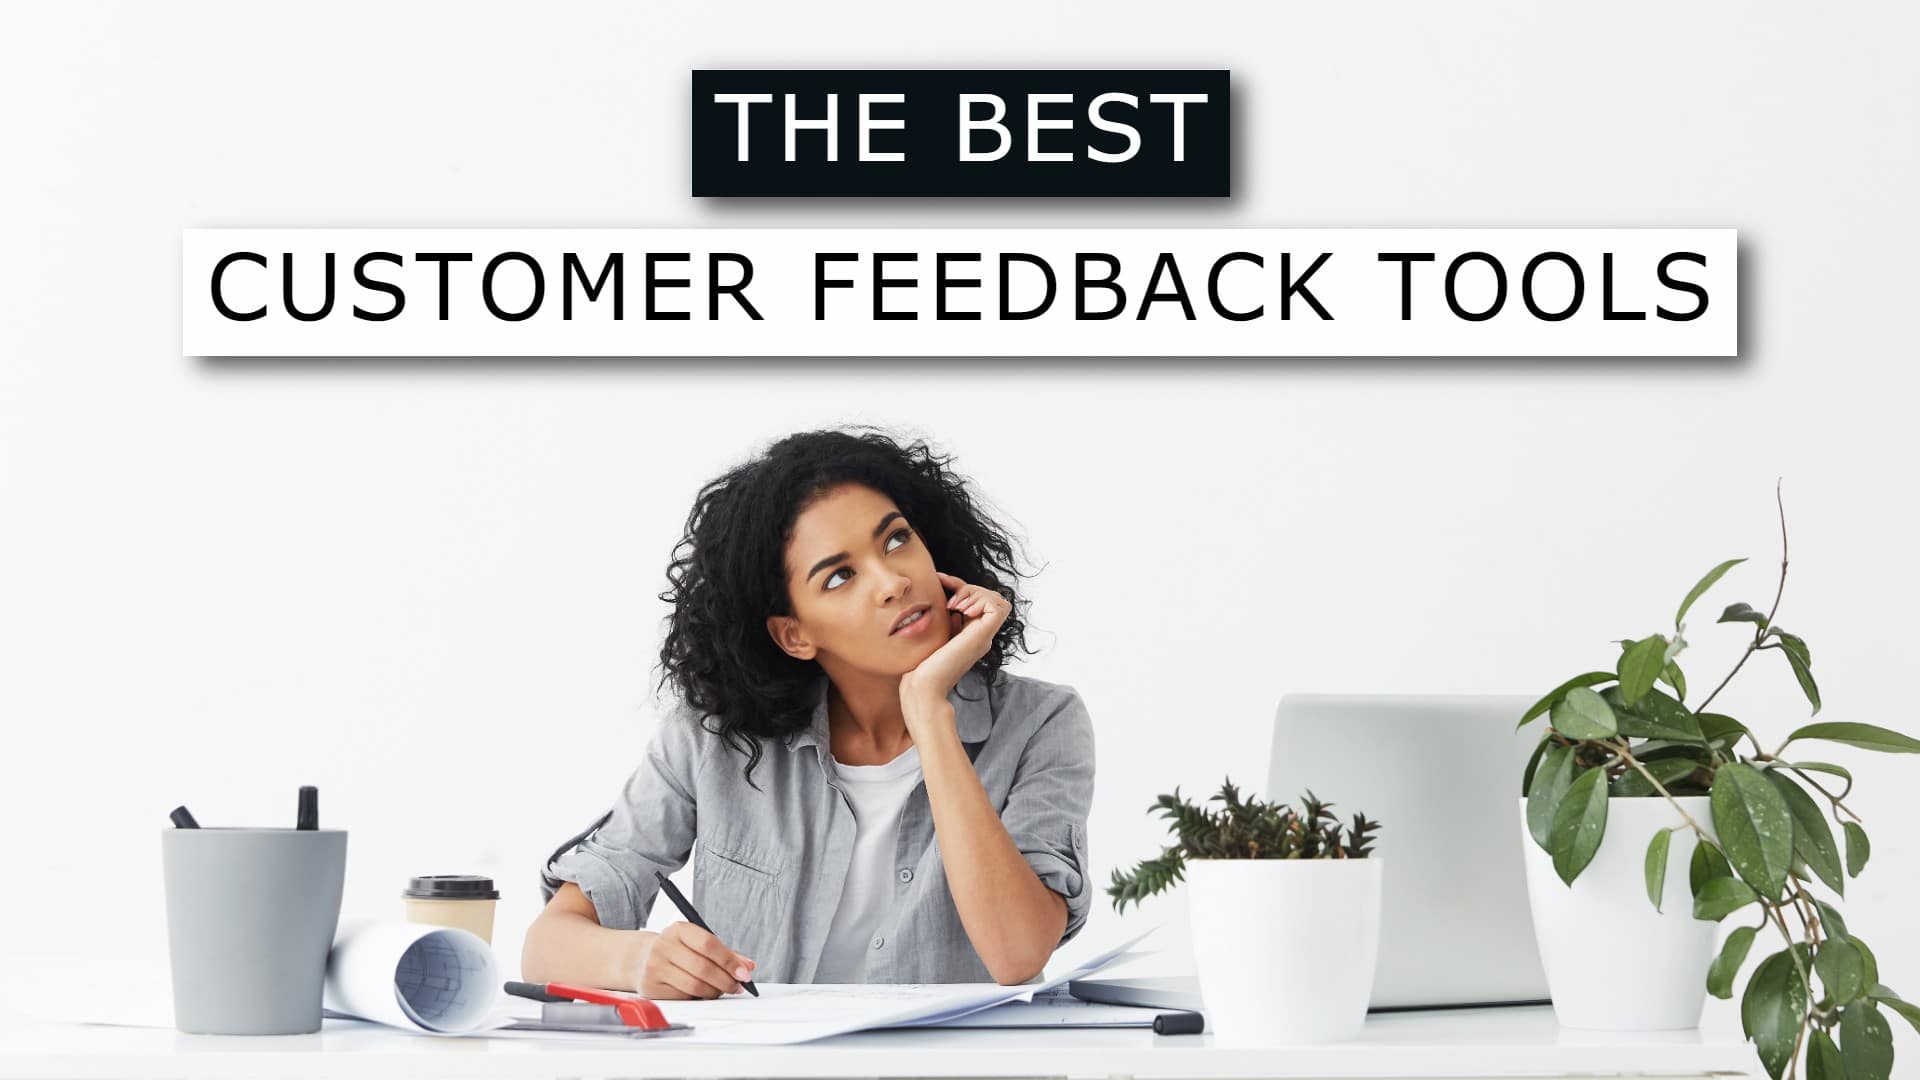 The 27 Best Customer Feedback Tools You’ll Want to Try | 2022 Updated List